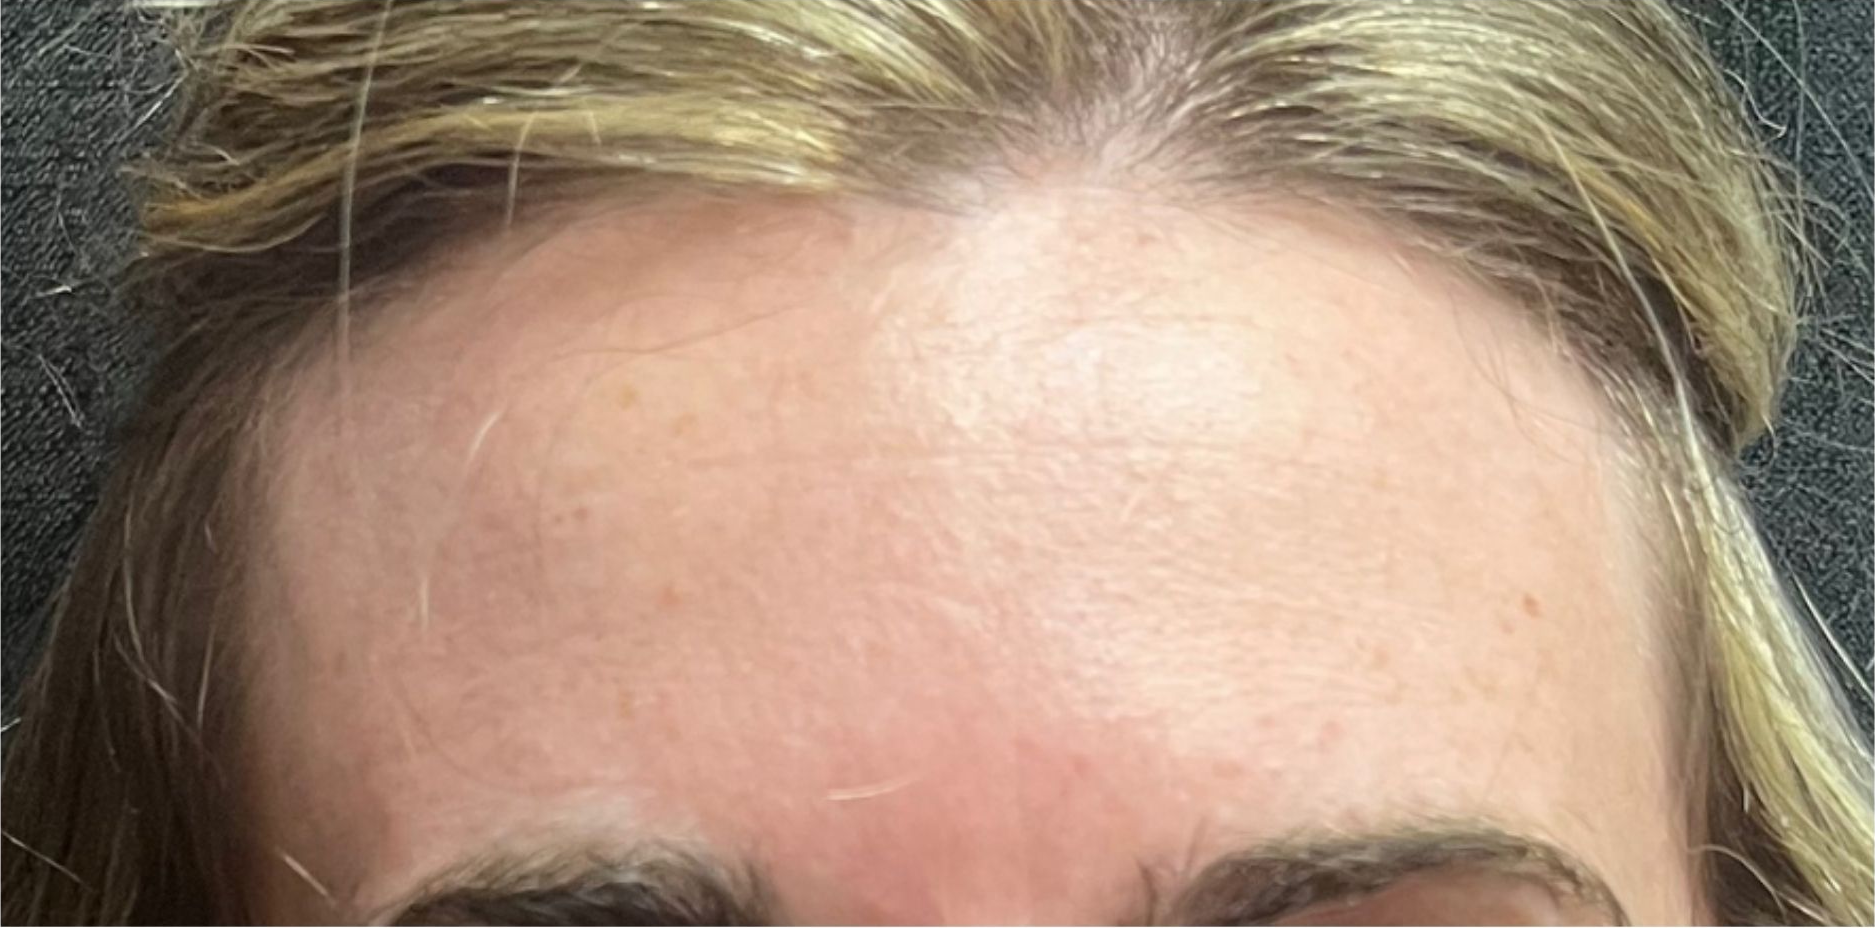 An endoscopic brow lift, also known as an endoscopic forehead lift, is a minimally invasive surgical procedure that aims to elevate the eyebrows and smooth out forehead wrinkles.